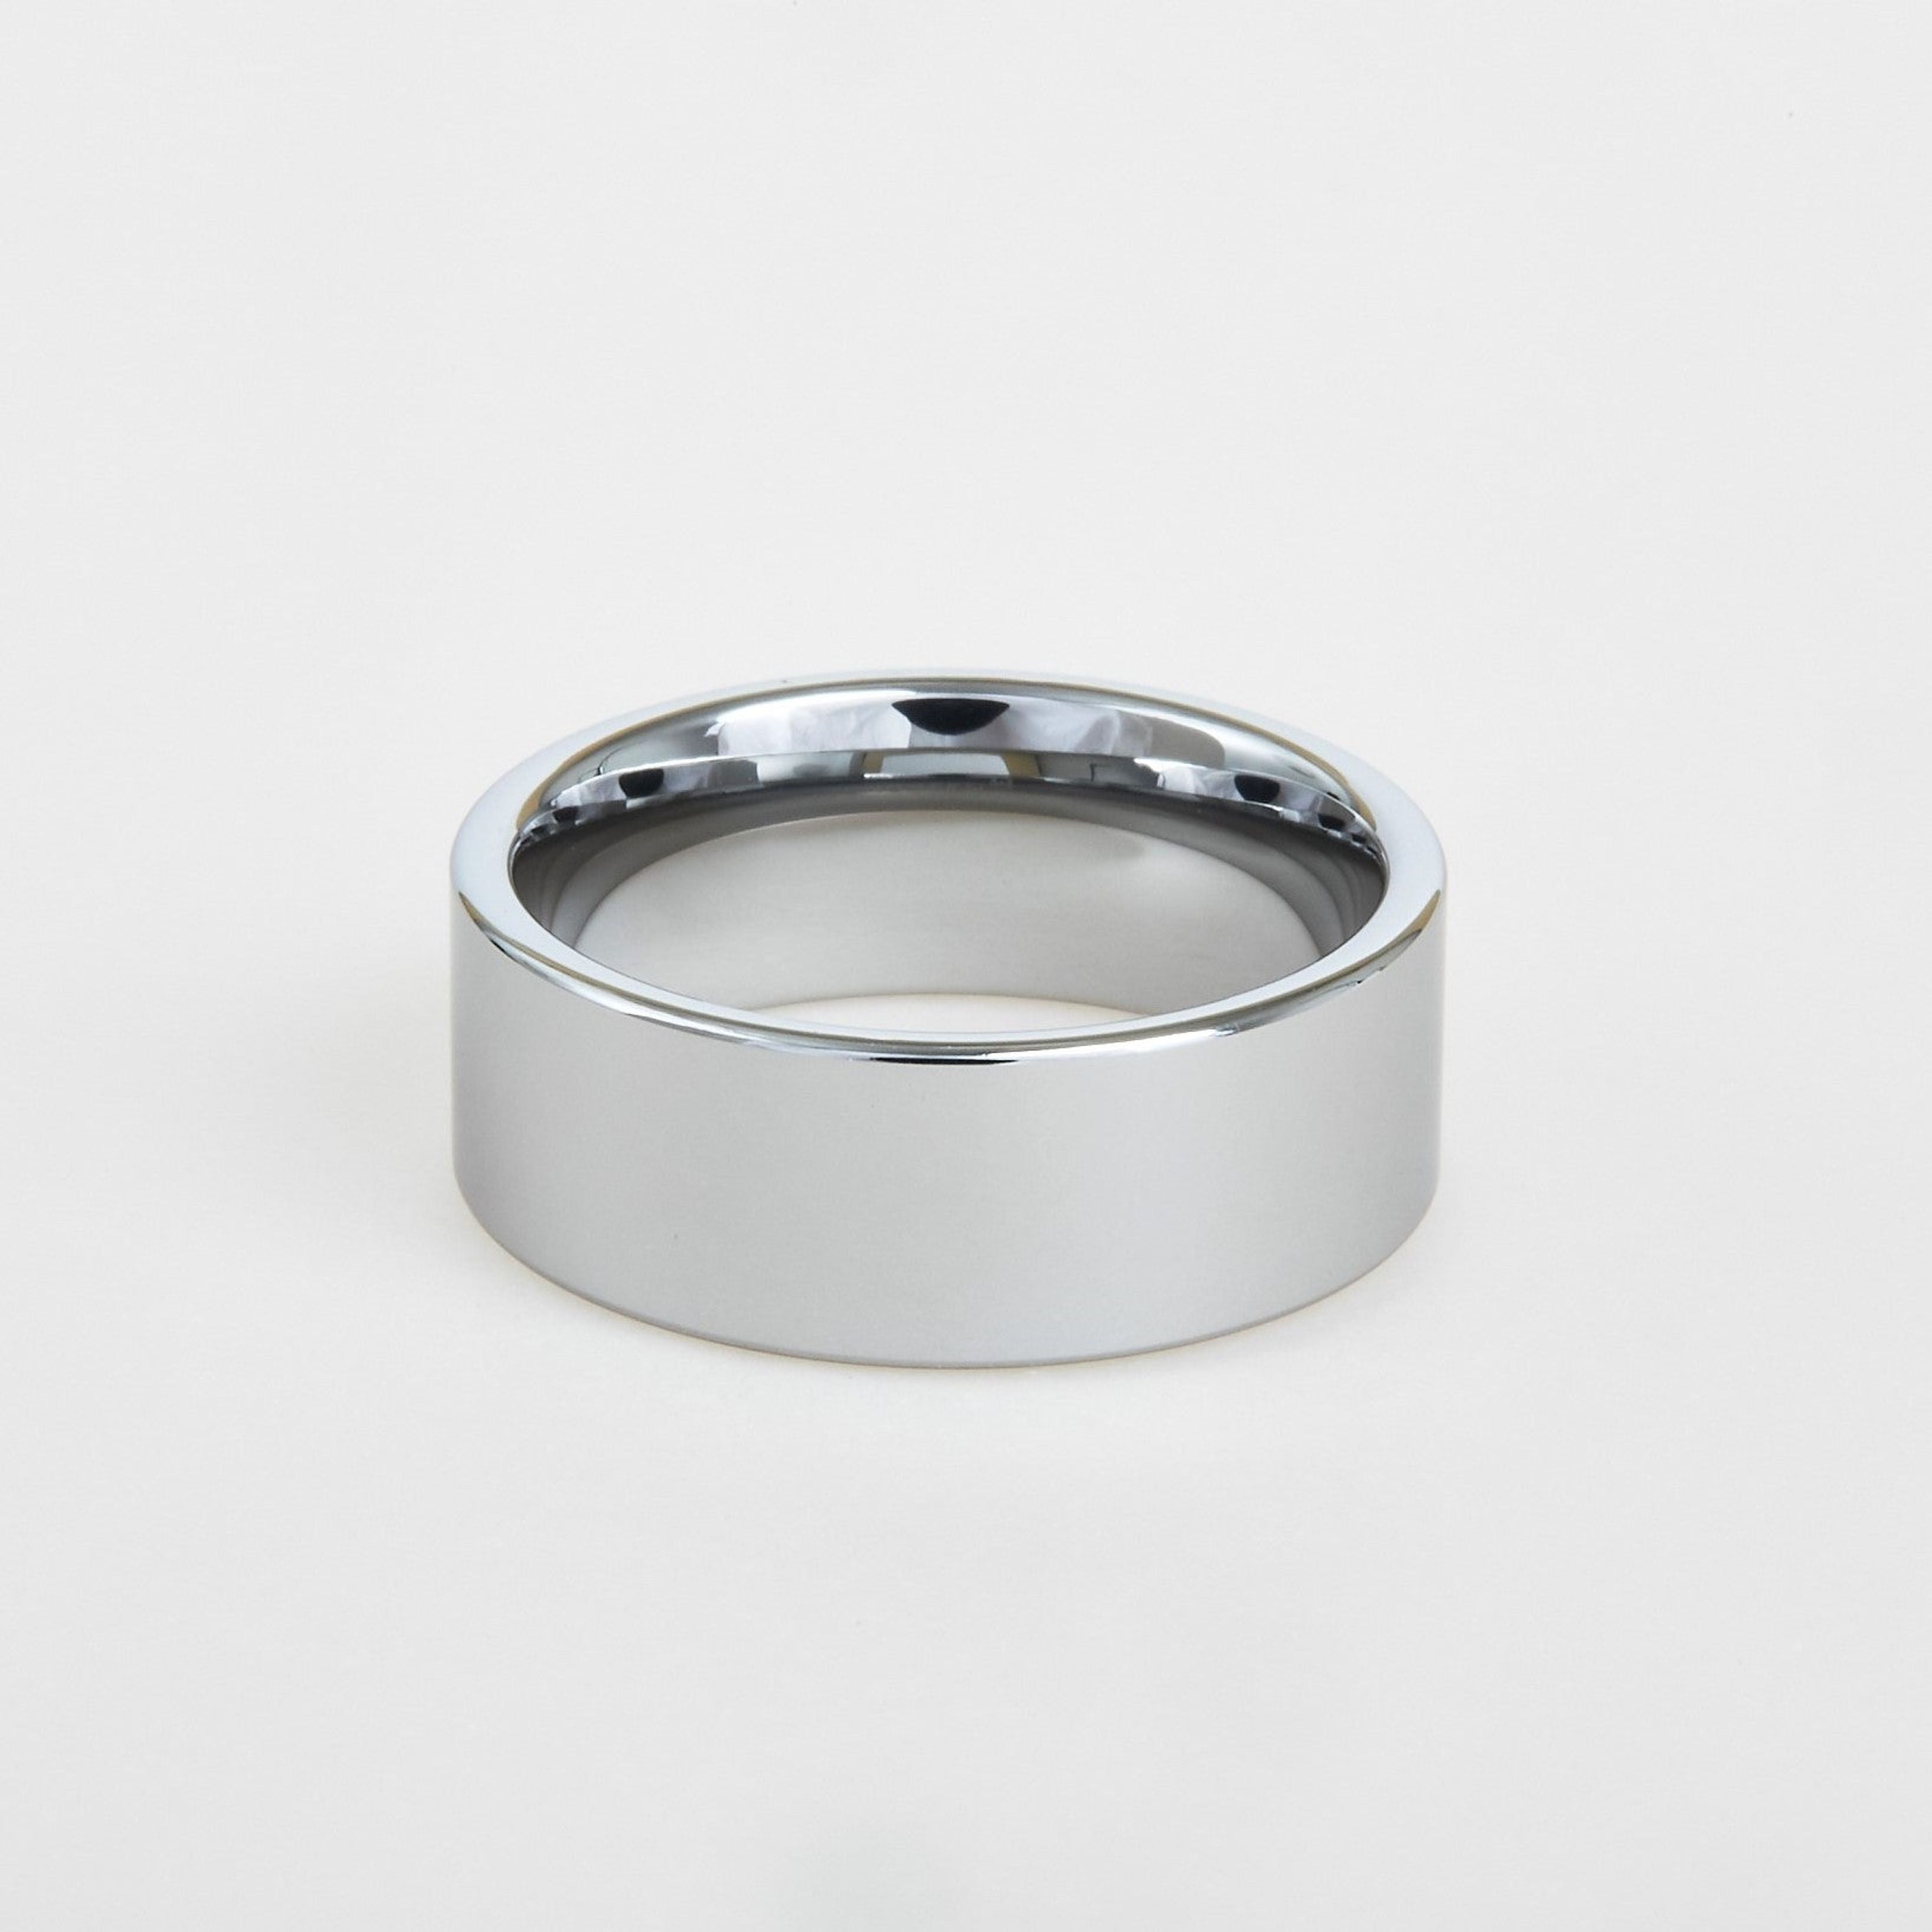 The Tungsten Flat Polished 8mm - FINAL SALE